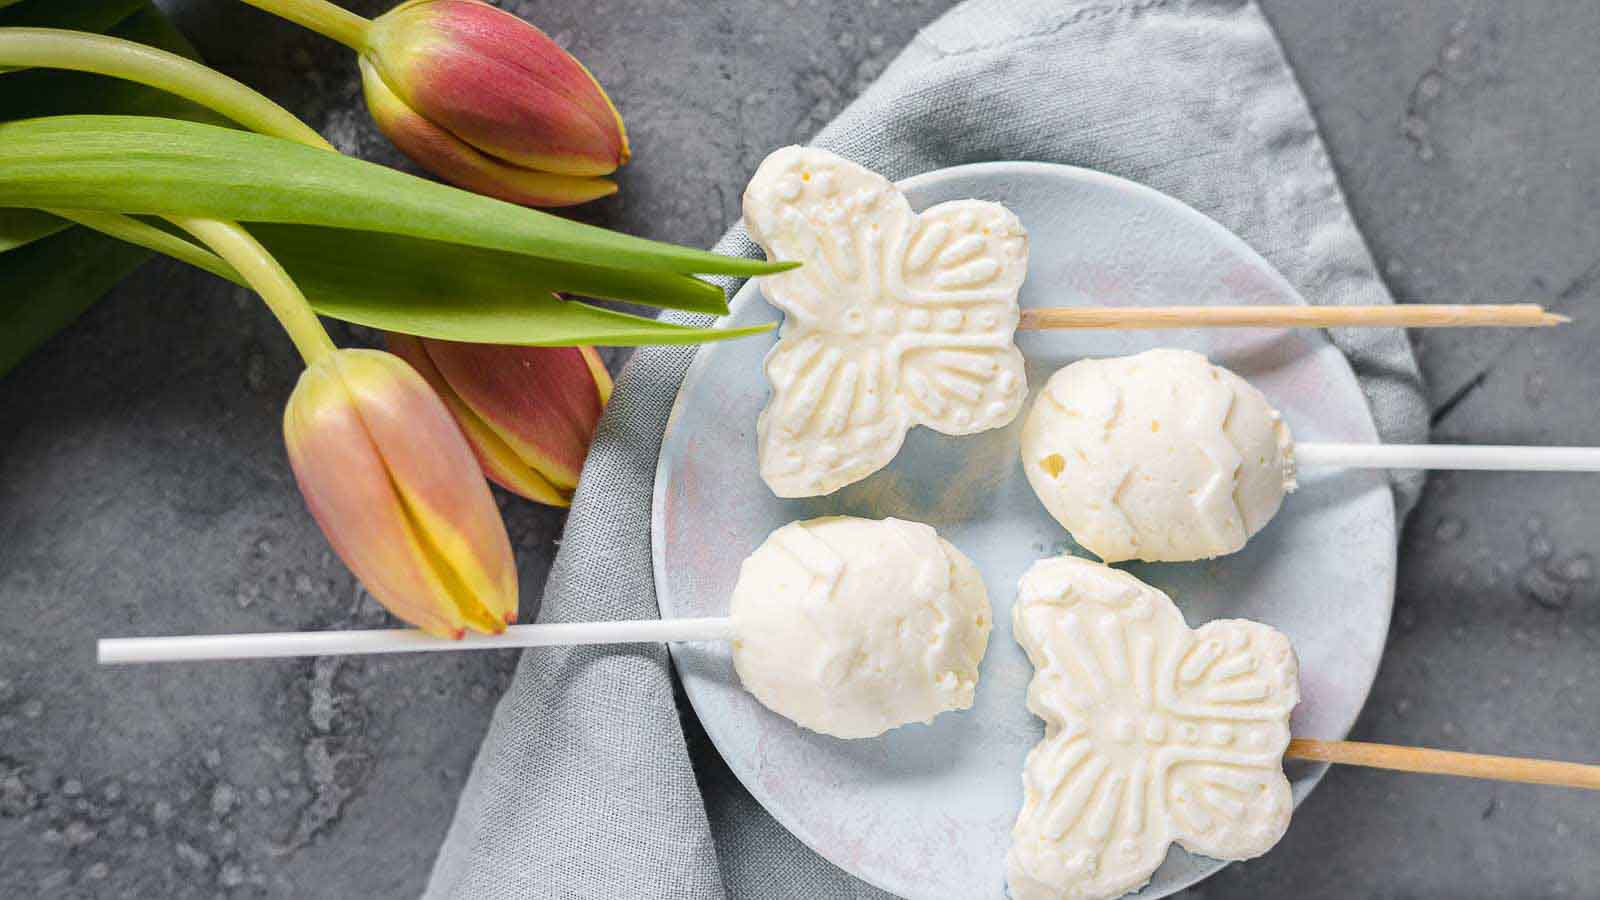 Mini Popsicles on a plate with tulips.